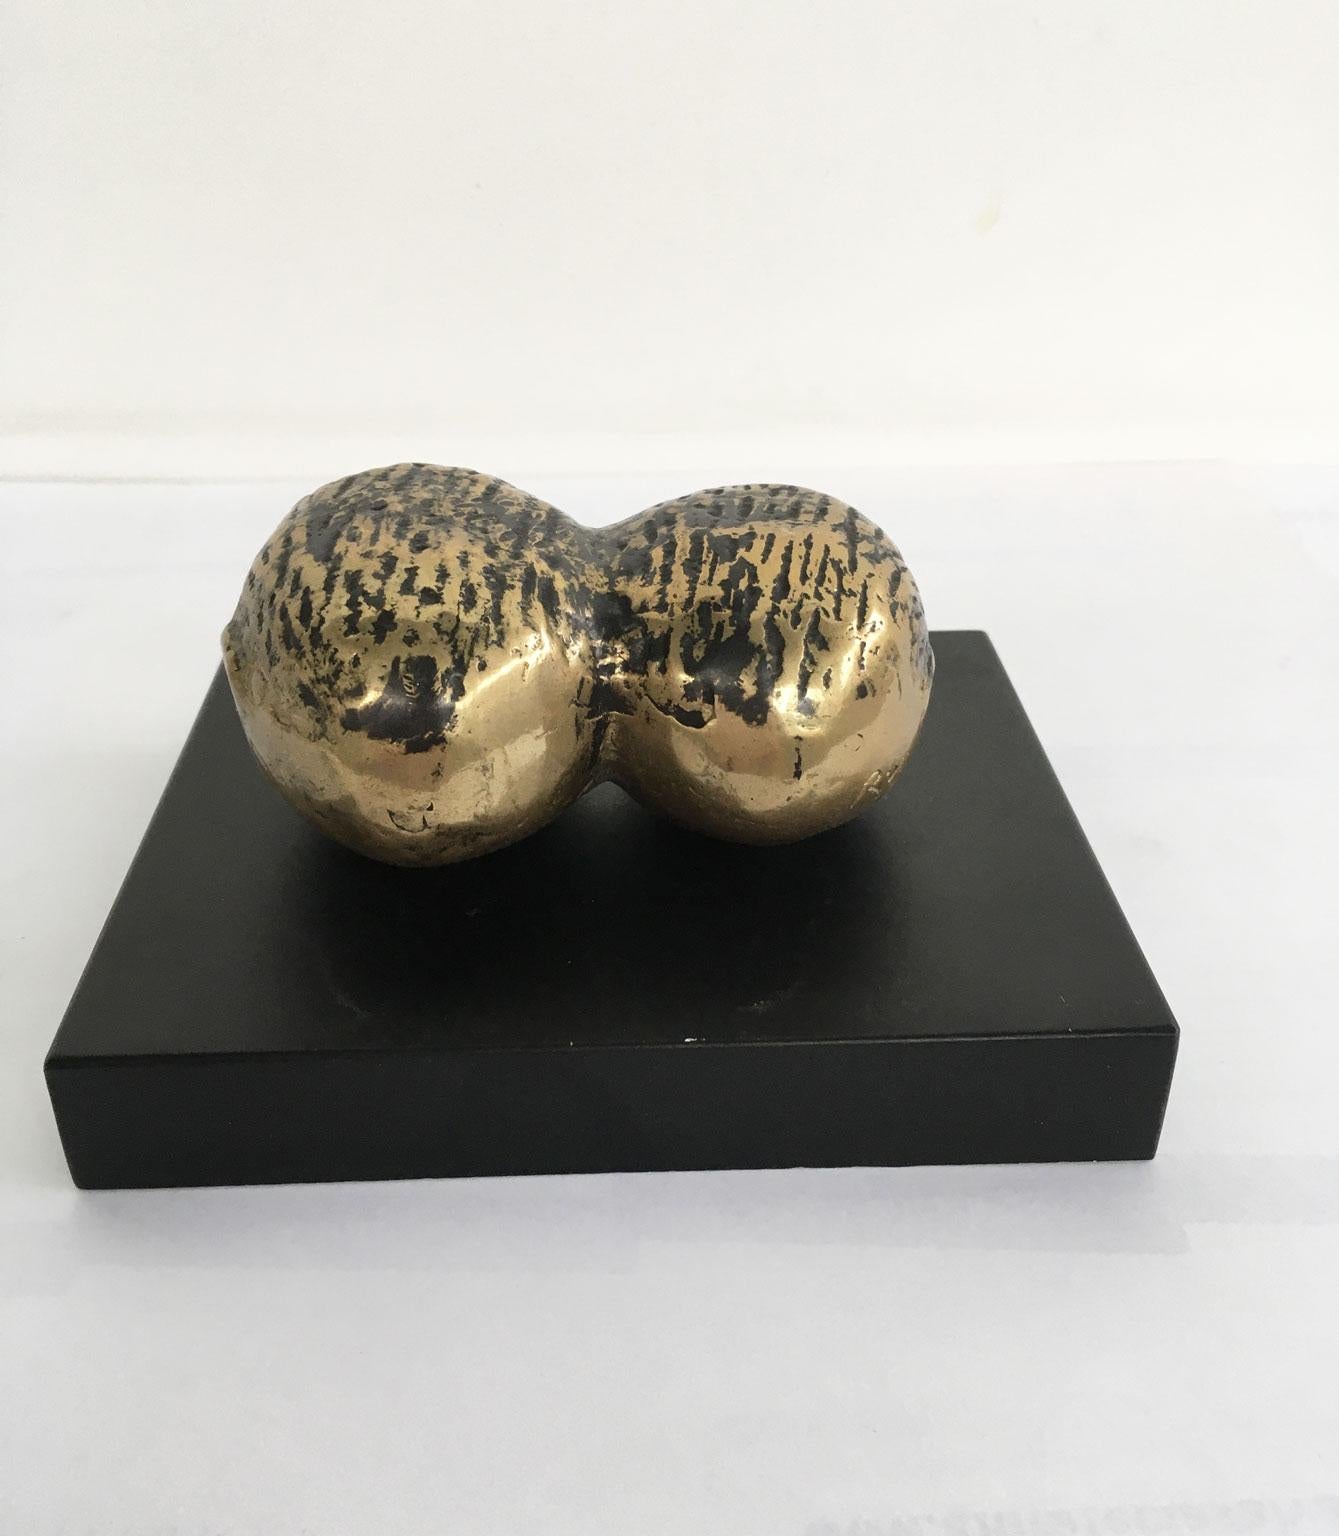 This intense abstract bronze sculpture was created by the Italian artist Eli Riva in the Late 20th Century. The artwork is a multiple numbered and signed of 500 specimens. The title is 